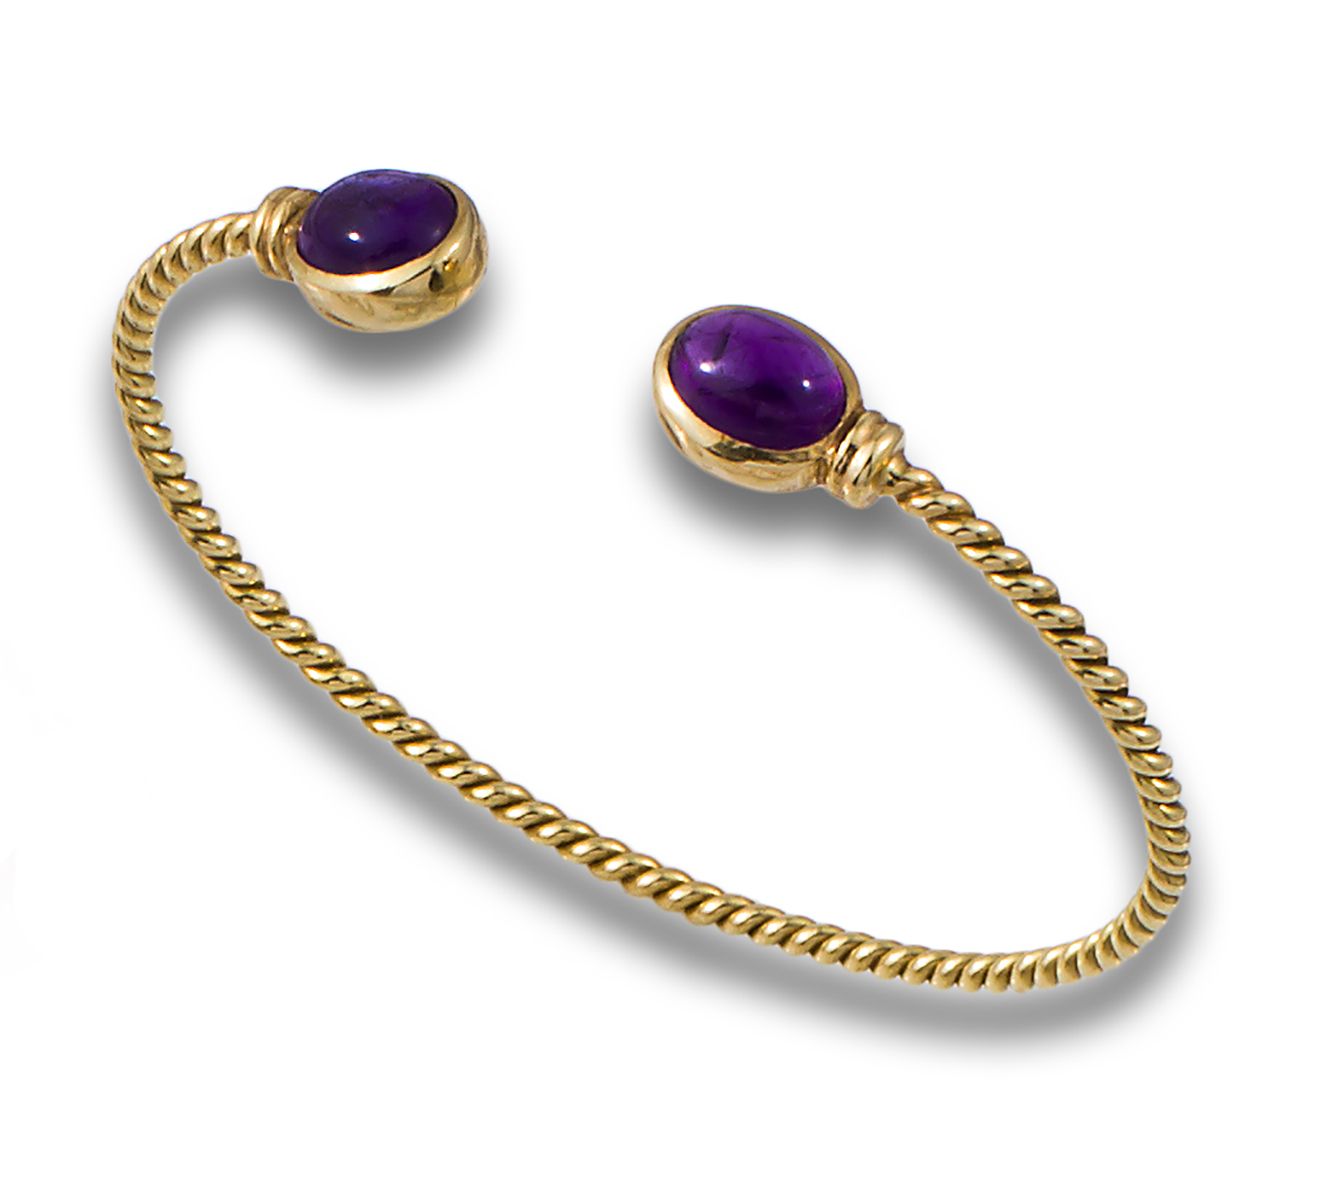 TORQUE BRACELET, CABOCHON AMETHYSTS, YELLOW GOLD Bracciale a coppia in oro giall&hellip;